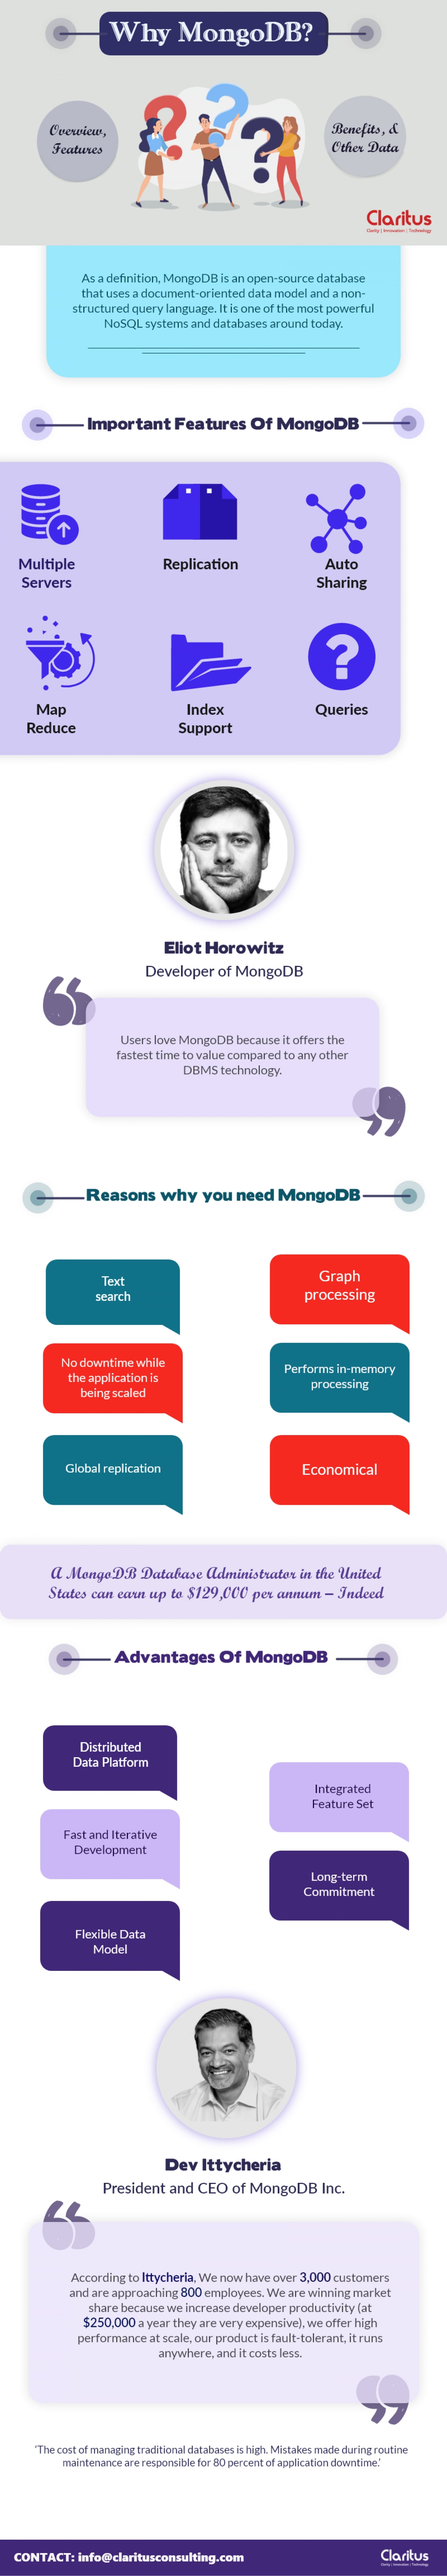 Why MongoDB? - Overview, Features, Benefits, & Other Data